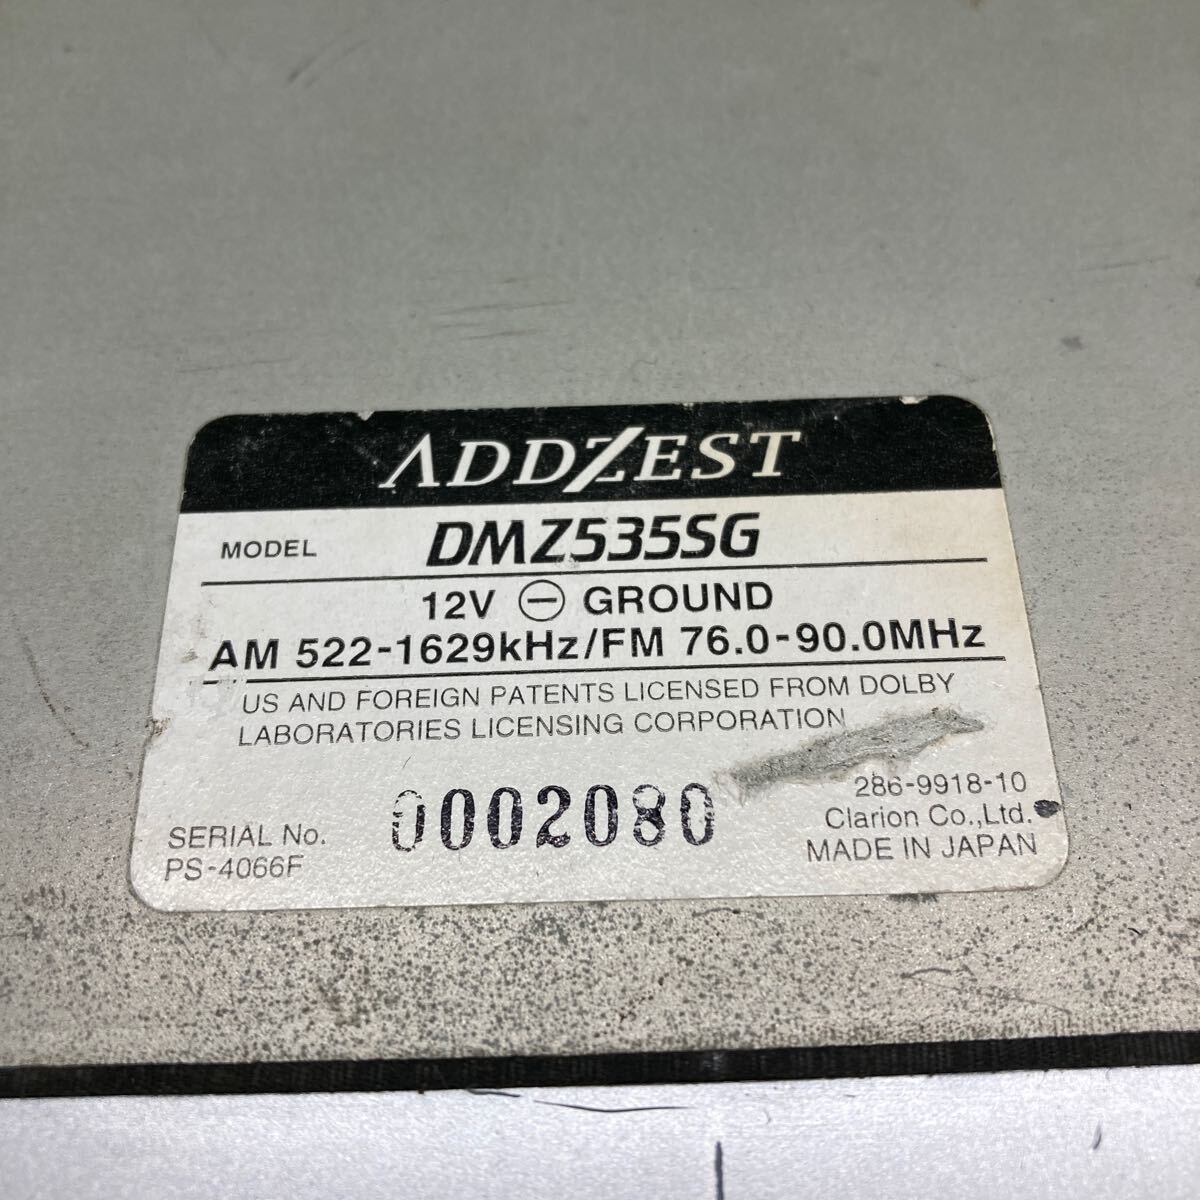 AV4-545 super-discount car stereo ADDZEST clarion DMZ535SG 0002080 CD MD FM/AM body only simple operation verification ending used present condition goods 